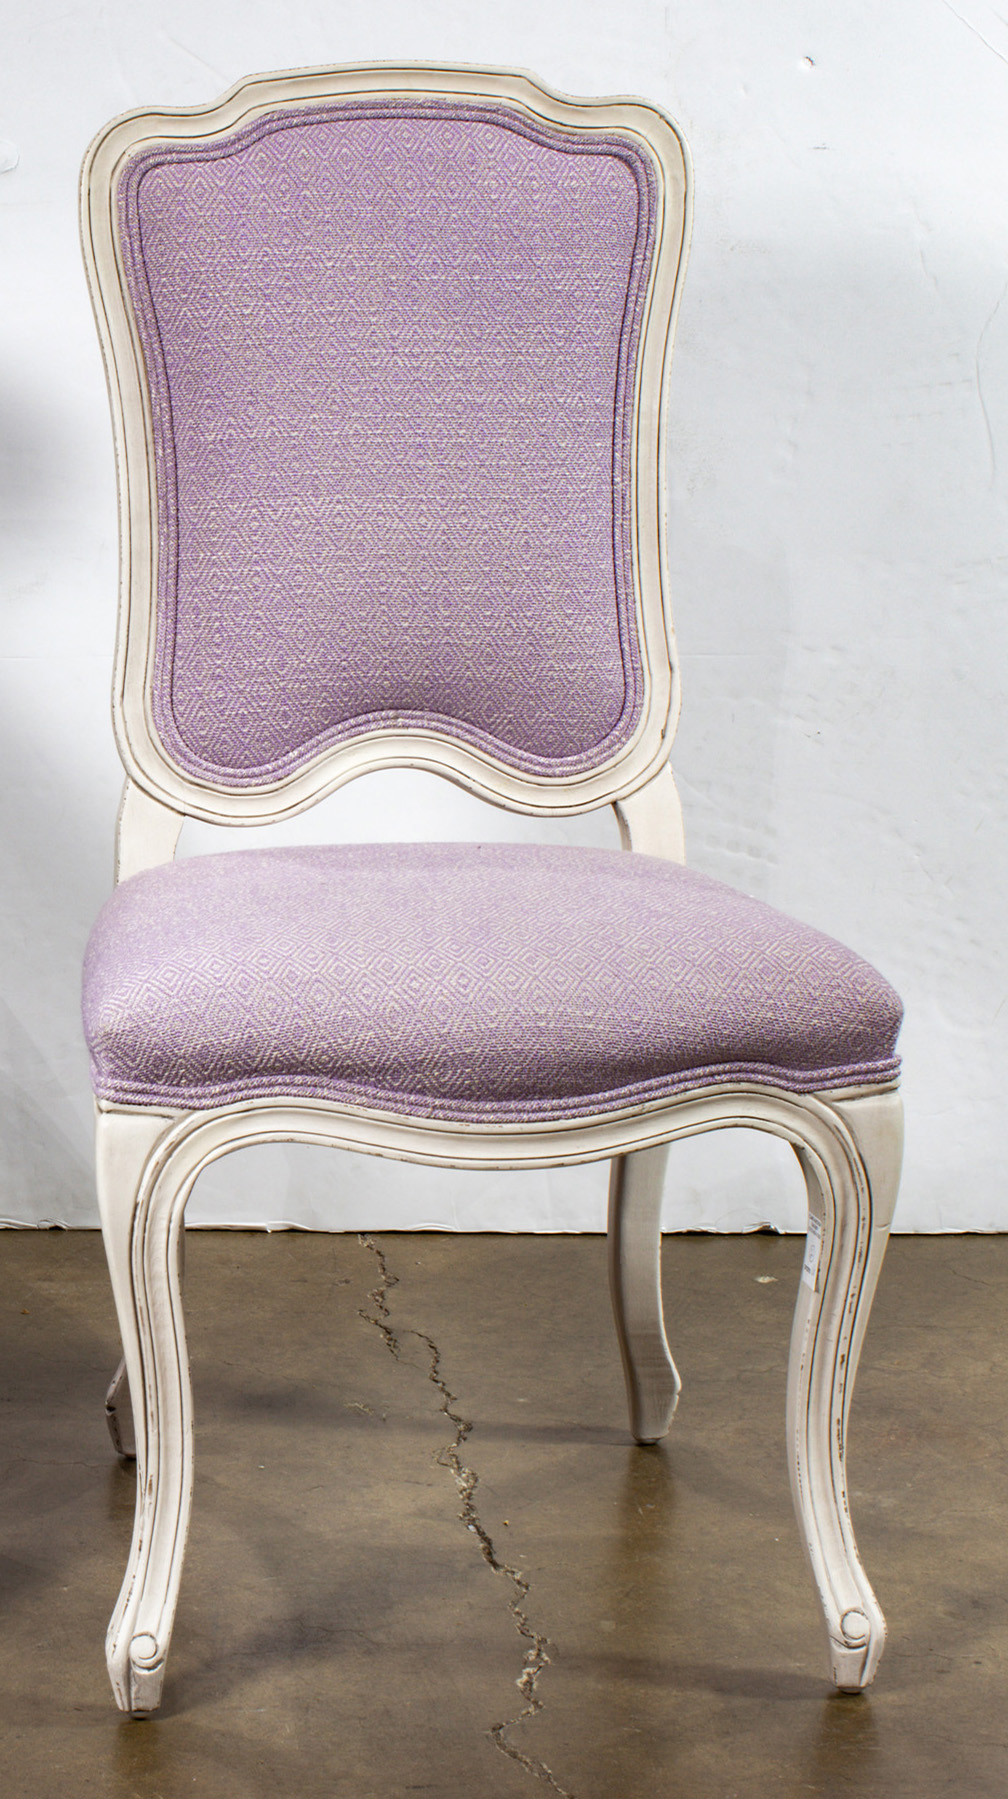 FRENCH PROVINCIAL STYLE SIDE CHAIR 3a370f